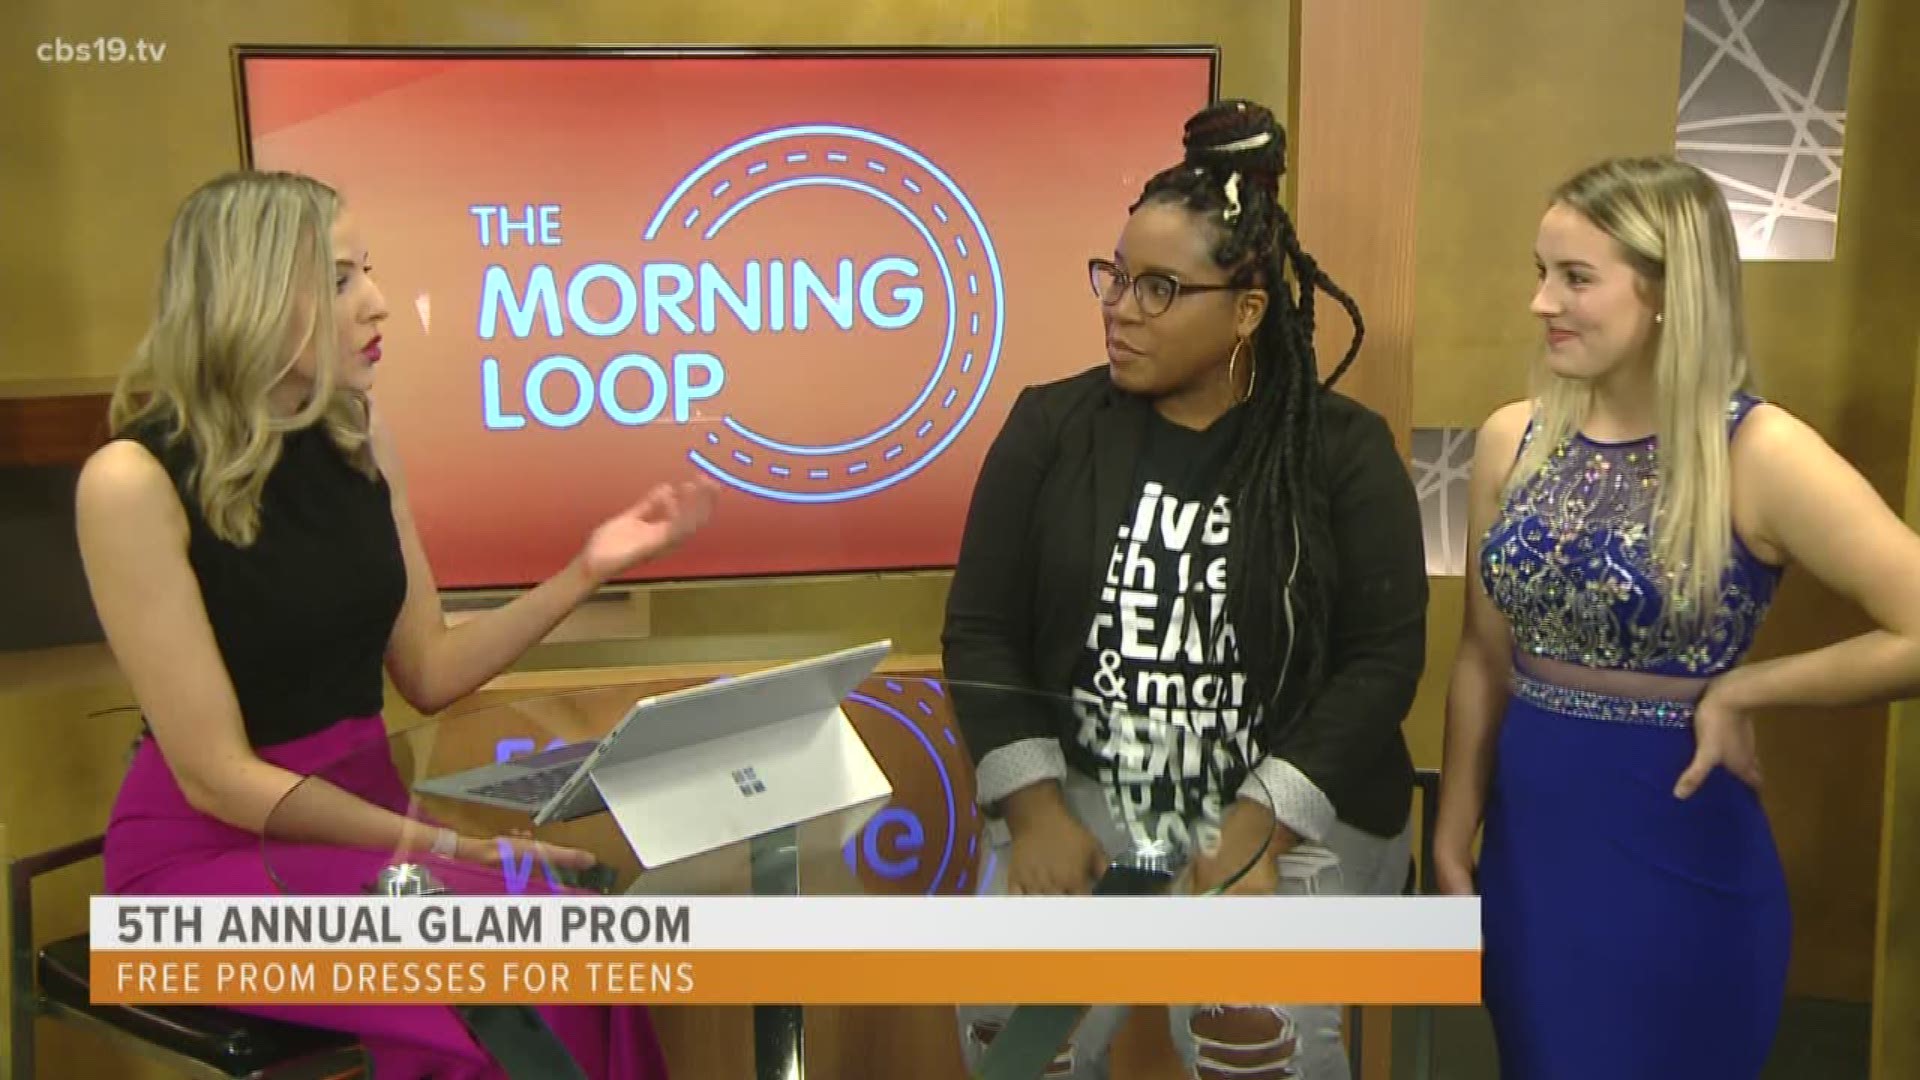 Toyia Jordan with the "I Am Beautiful" movement sat down with CBS19 about the 5th Annual "Glam Prom" initiative.